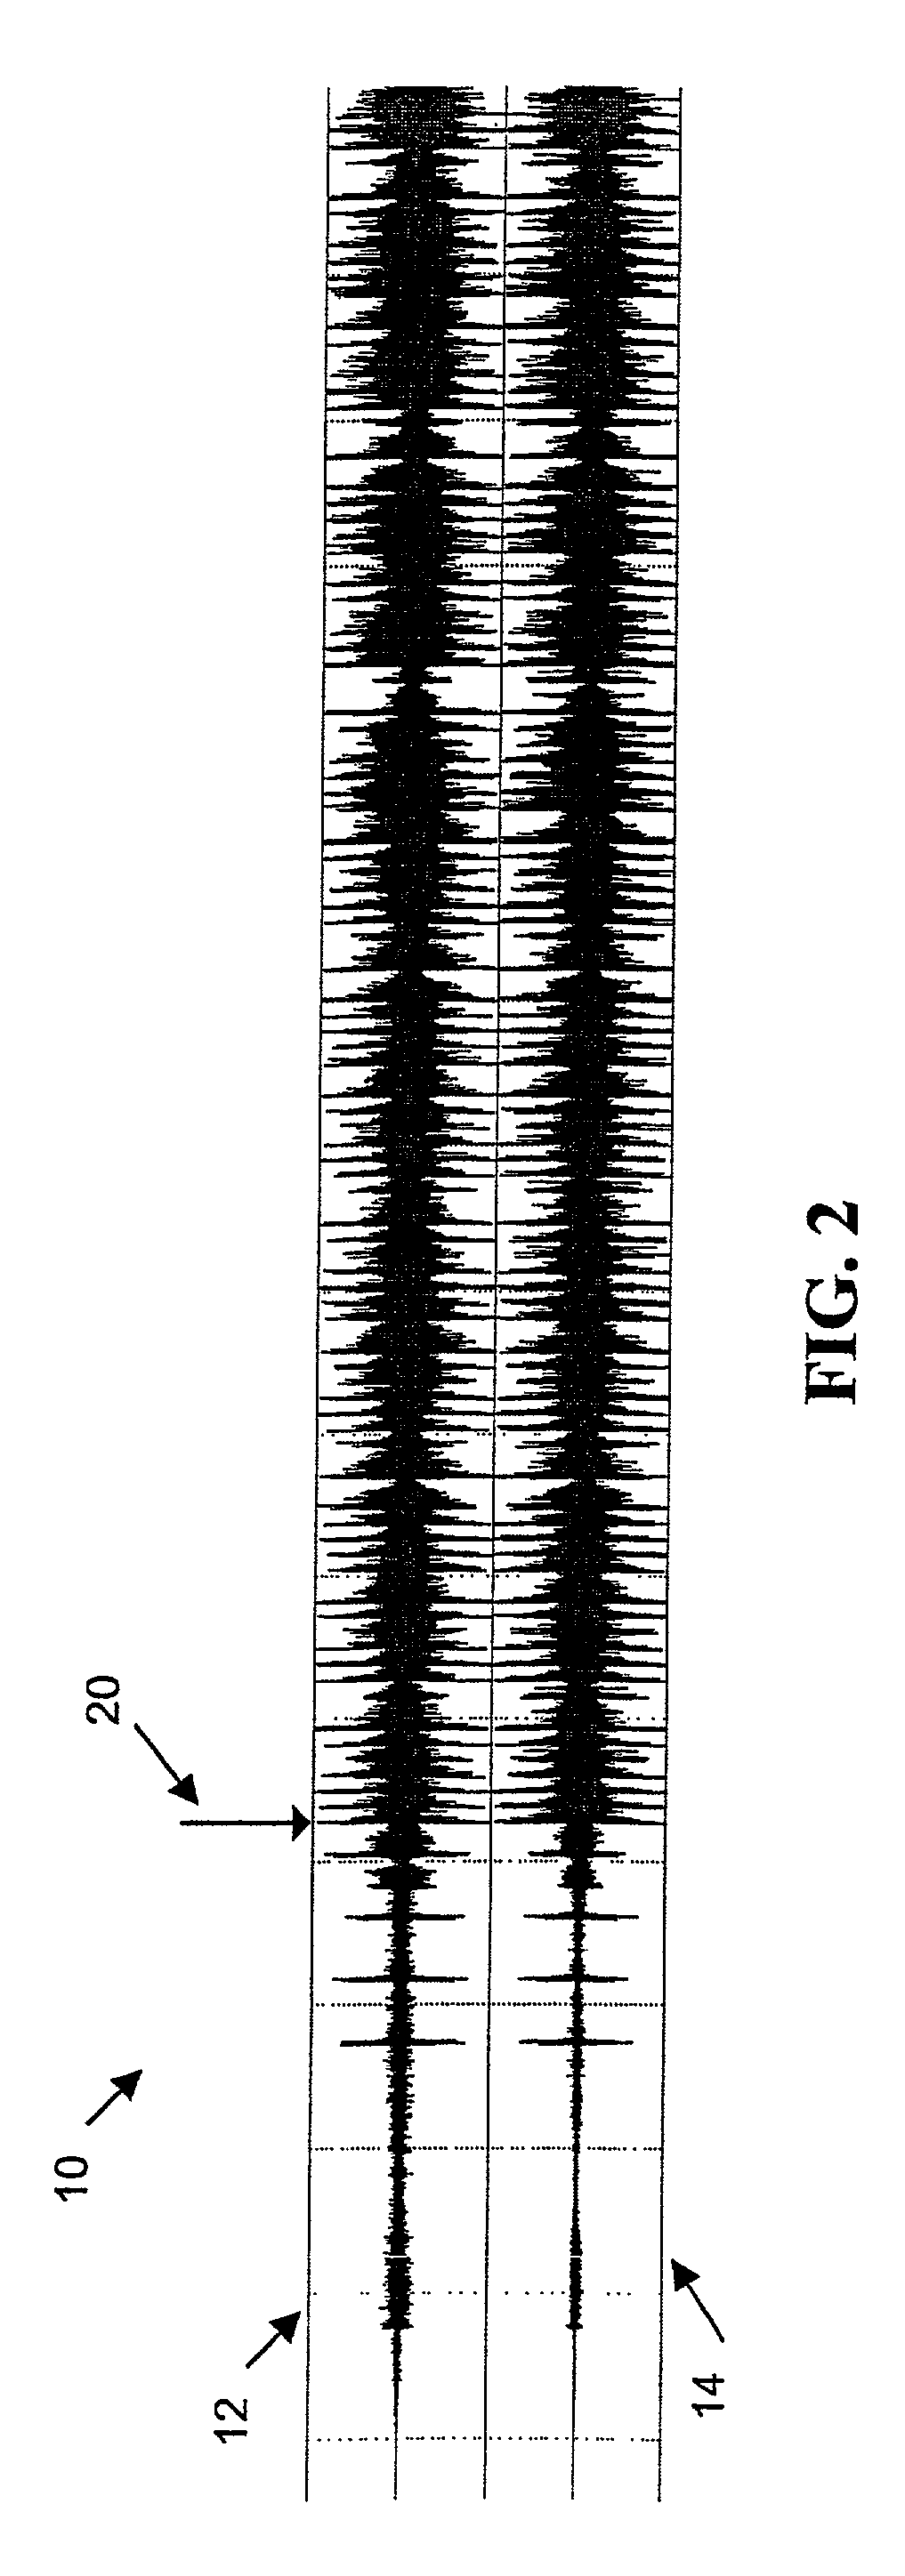 System for and method of determining the period of recurring events within a recorded signal